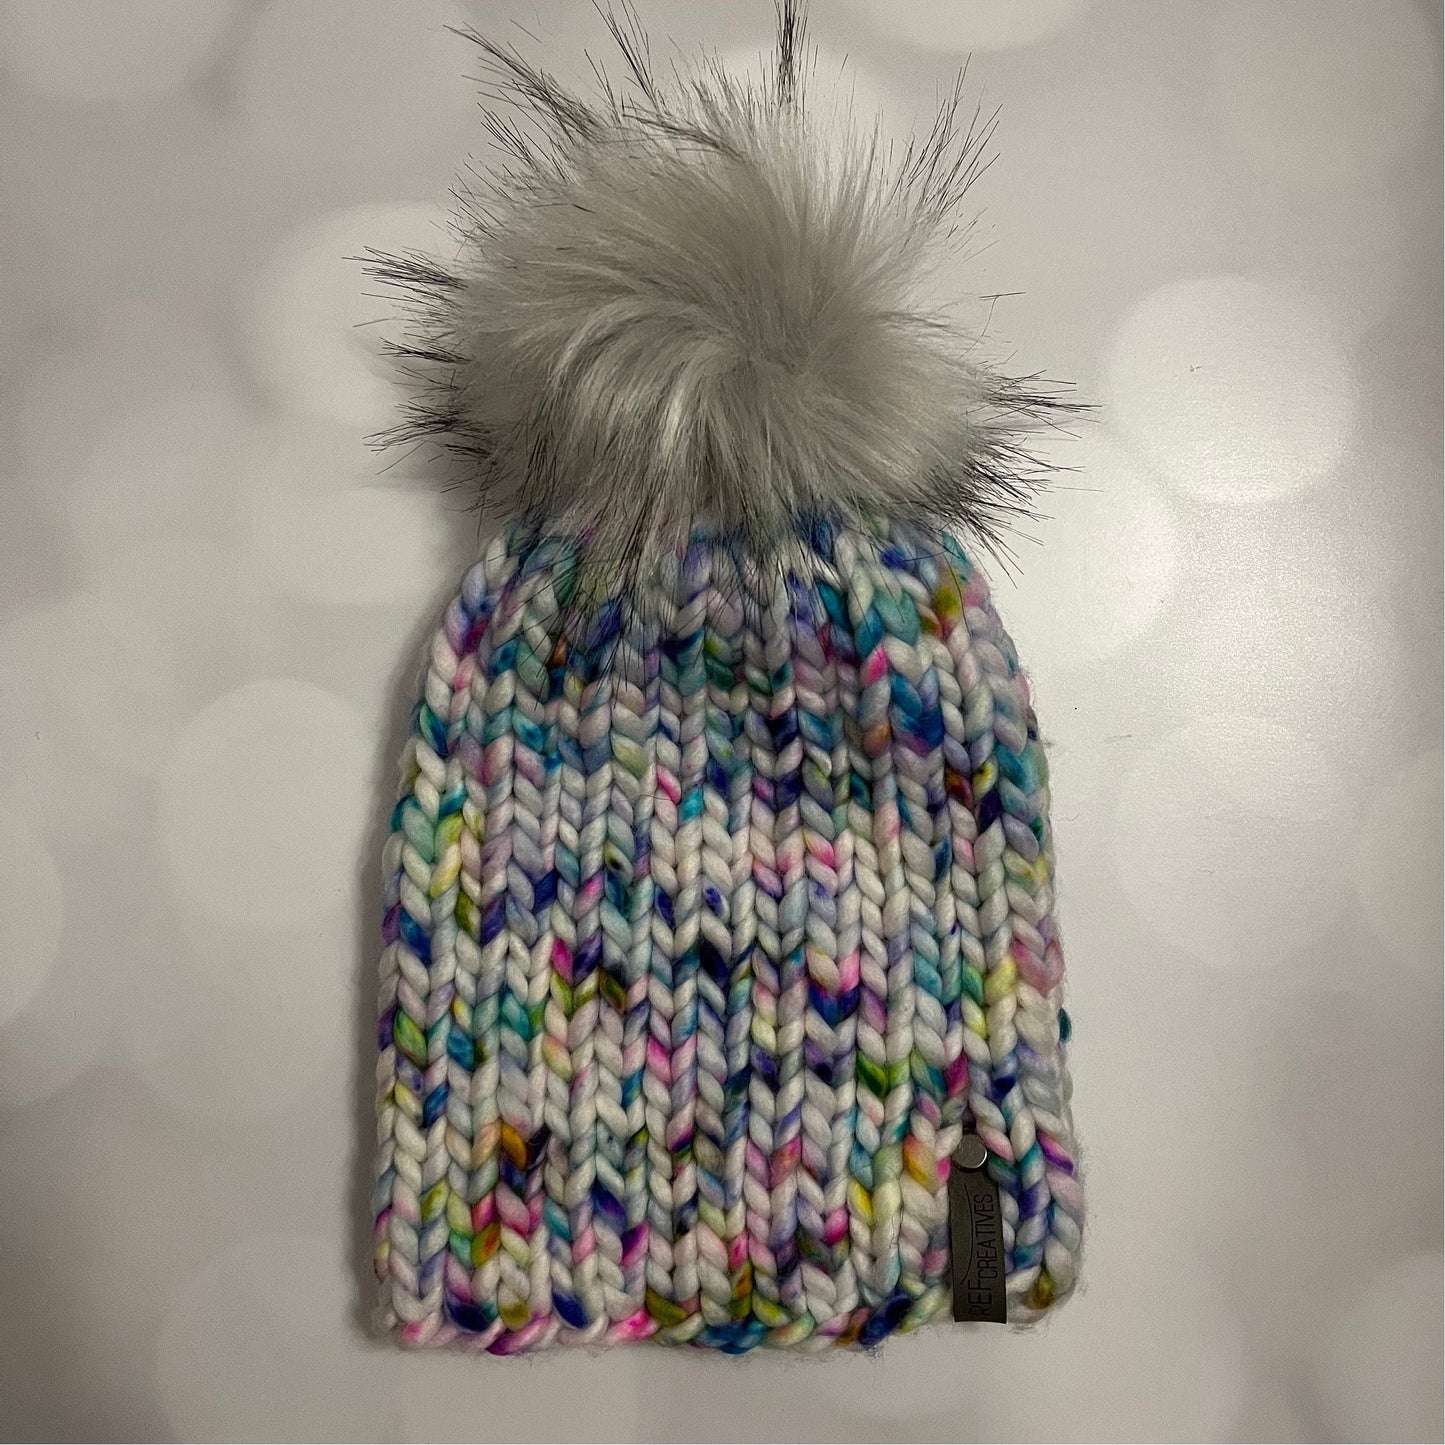 Luxury Neon Merino Wool Knit Hat - Speckled Neon Beanie Hand Knit Hat with Hand Dyed Yarn